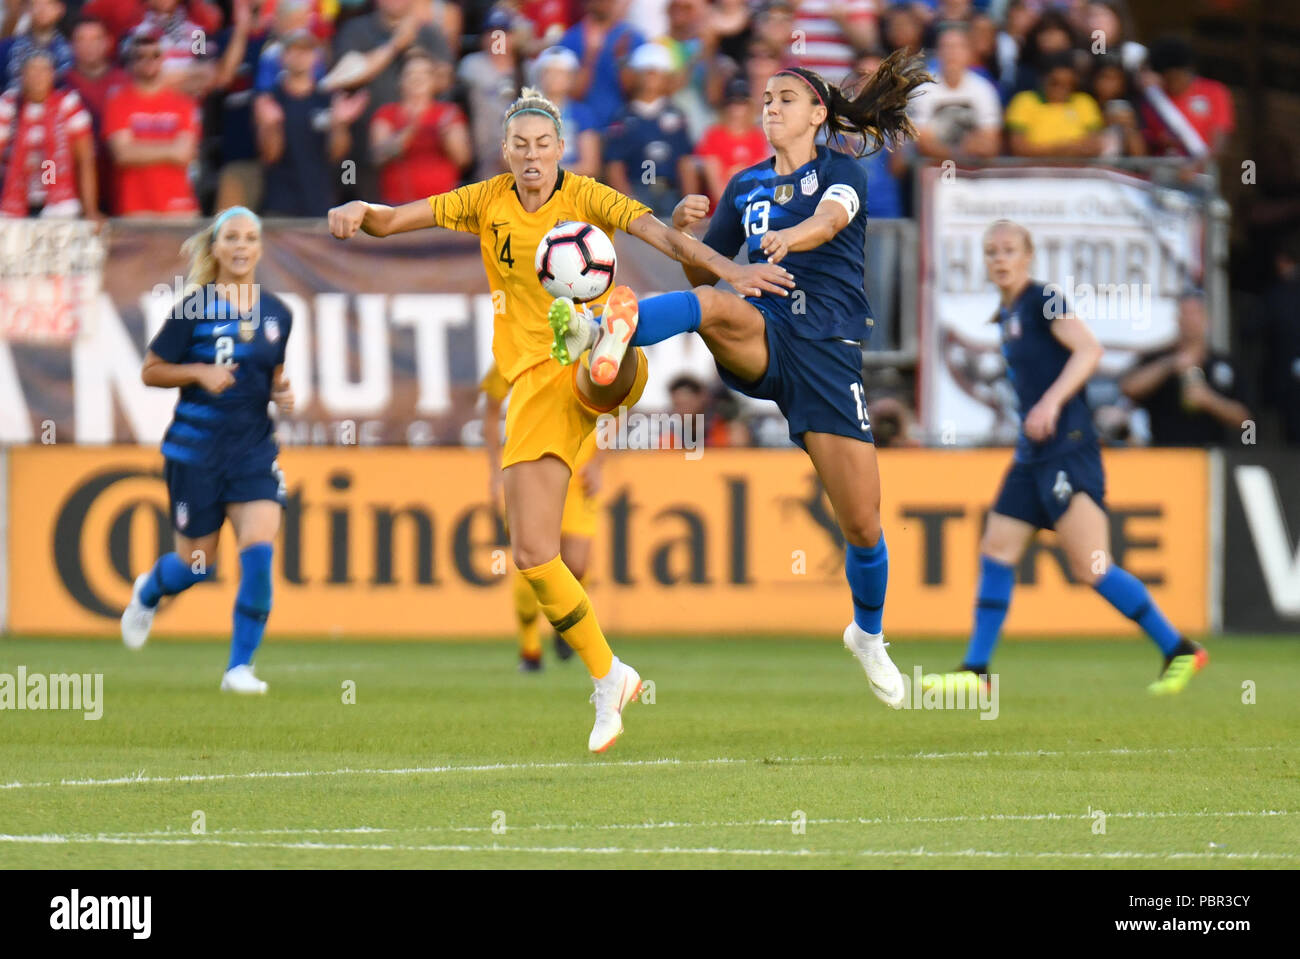 Sunday Aug 29, 2018: Alex Morgan (13) of the USWNT battles for a ball during a Tournament of Nations game against Australia at Pratt & Whitney Stadium in East Hartford, Connecticut. Gregory Vasil/CSM Stock Photo